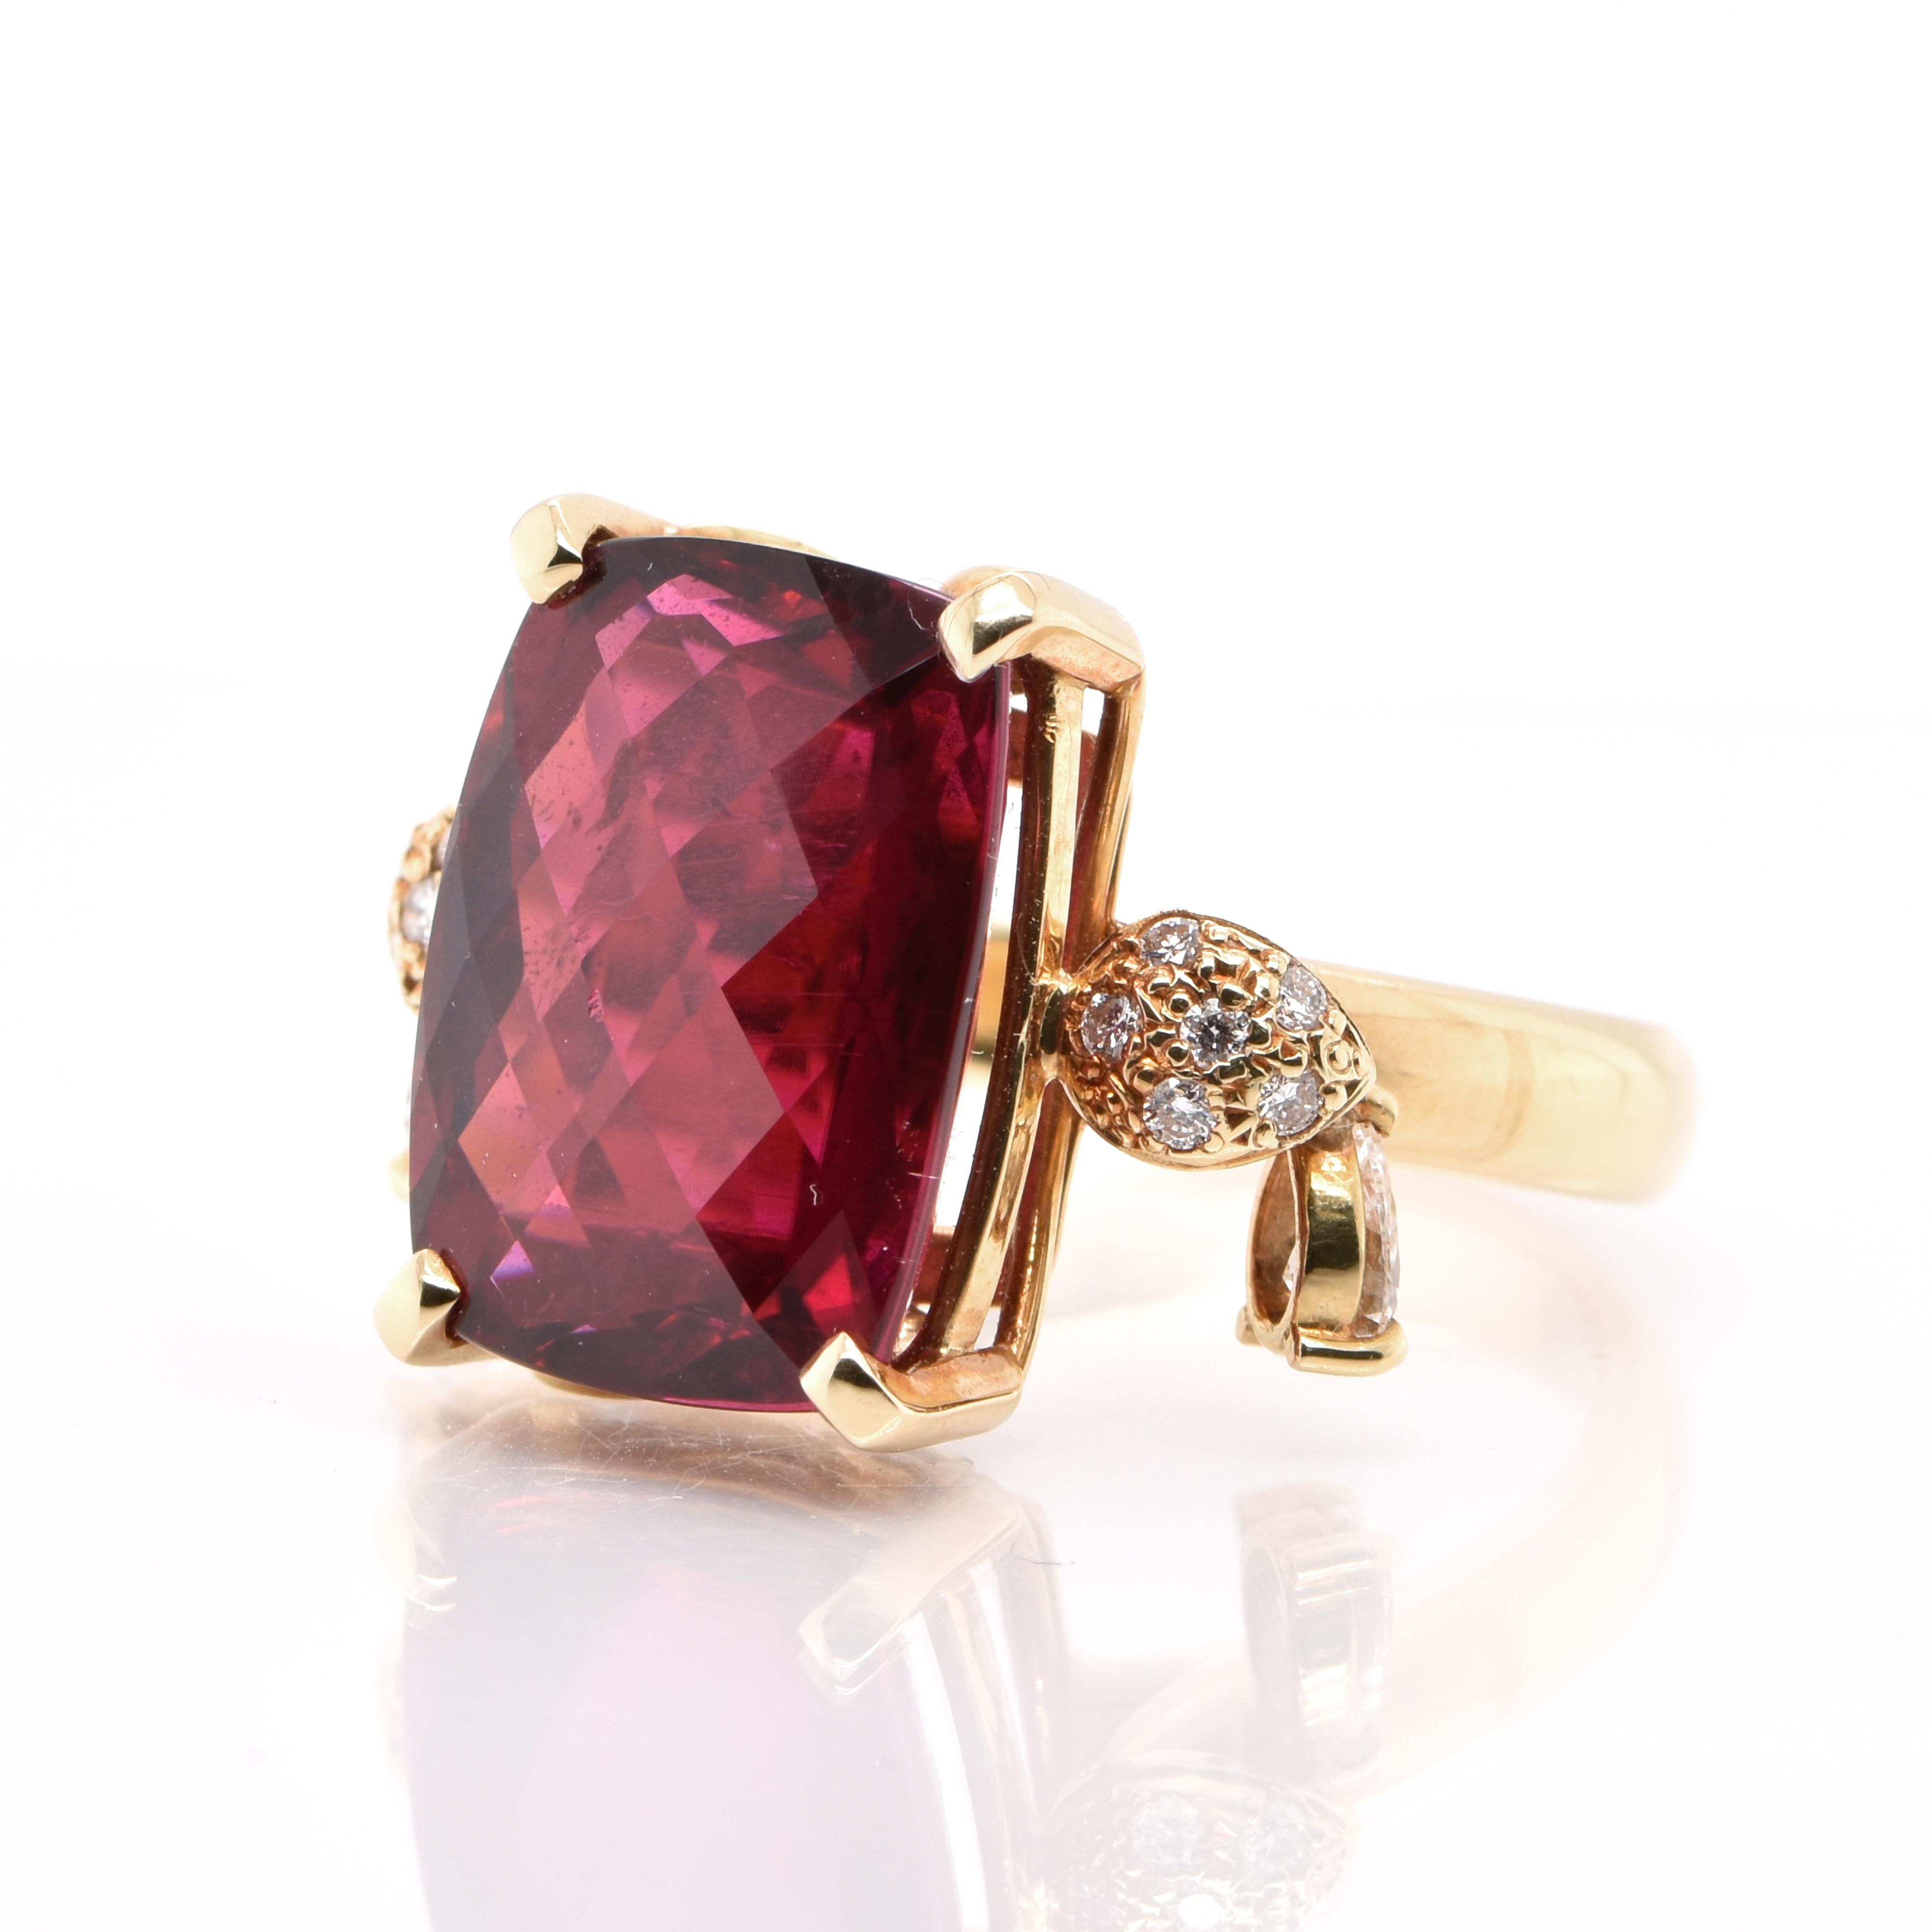 A stunning Cocktail Ring featuring a 9.36 Carat Rubellite Tourmaline and 0.46 Carats of Round Brilliant Diamond Accents set in 18K Yellow Gold. Tourmalines were first discovered by Spanish conquistadors in Brazil in 1500s. The name Tourmaline comes